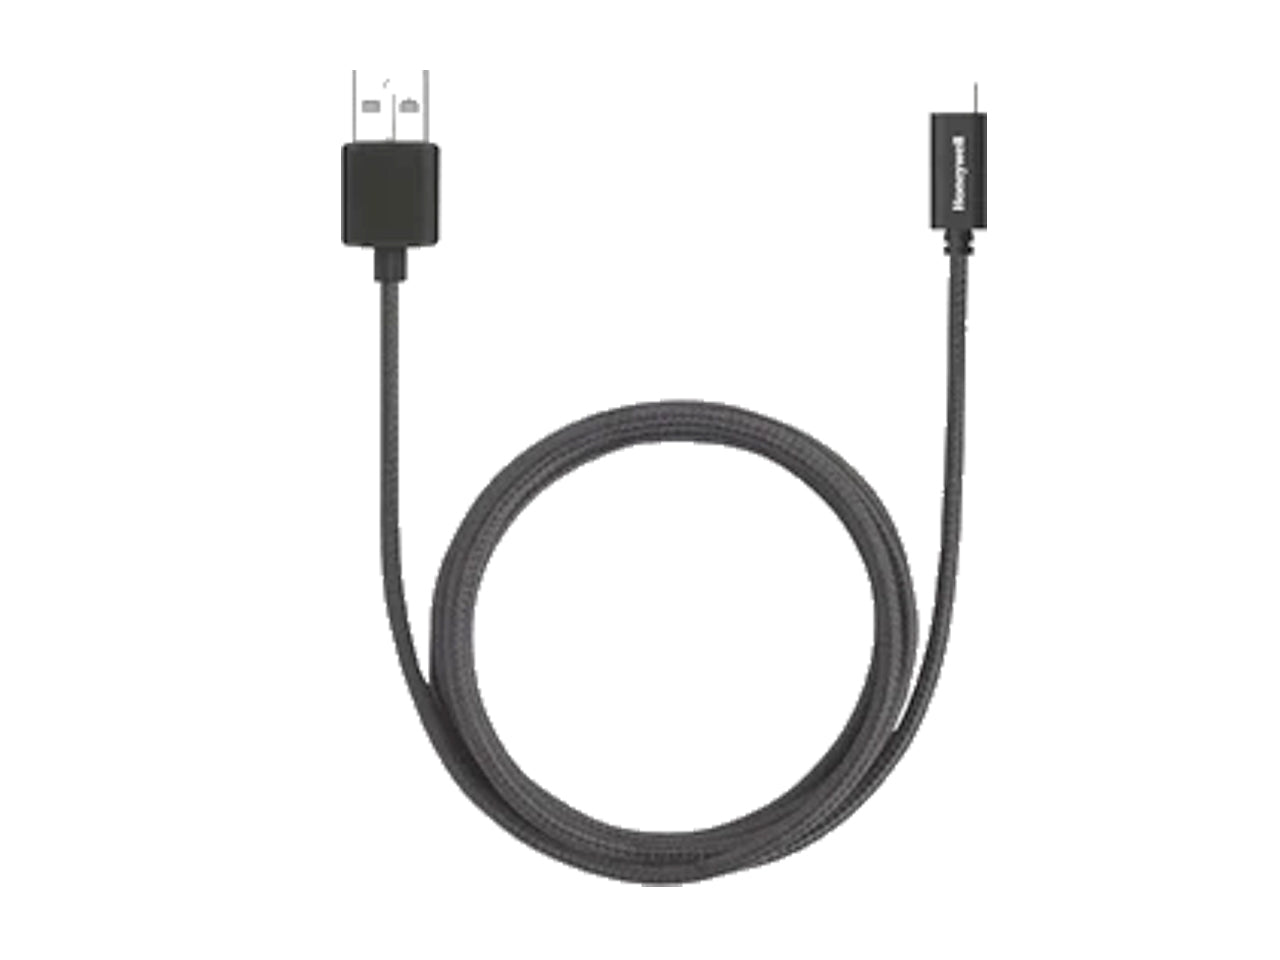 Honeywell USB 2.0 to Type C cable 1.2mtr (Braided) Black